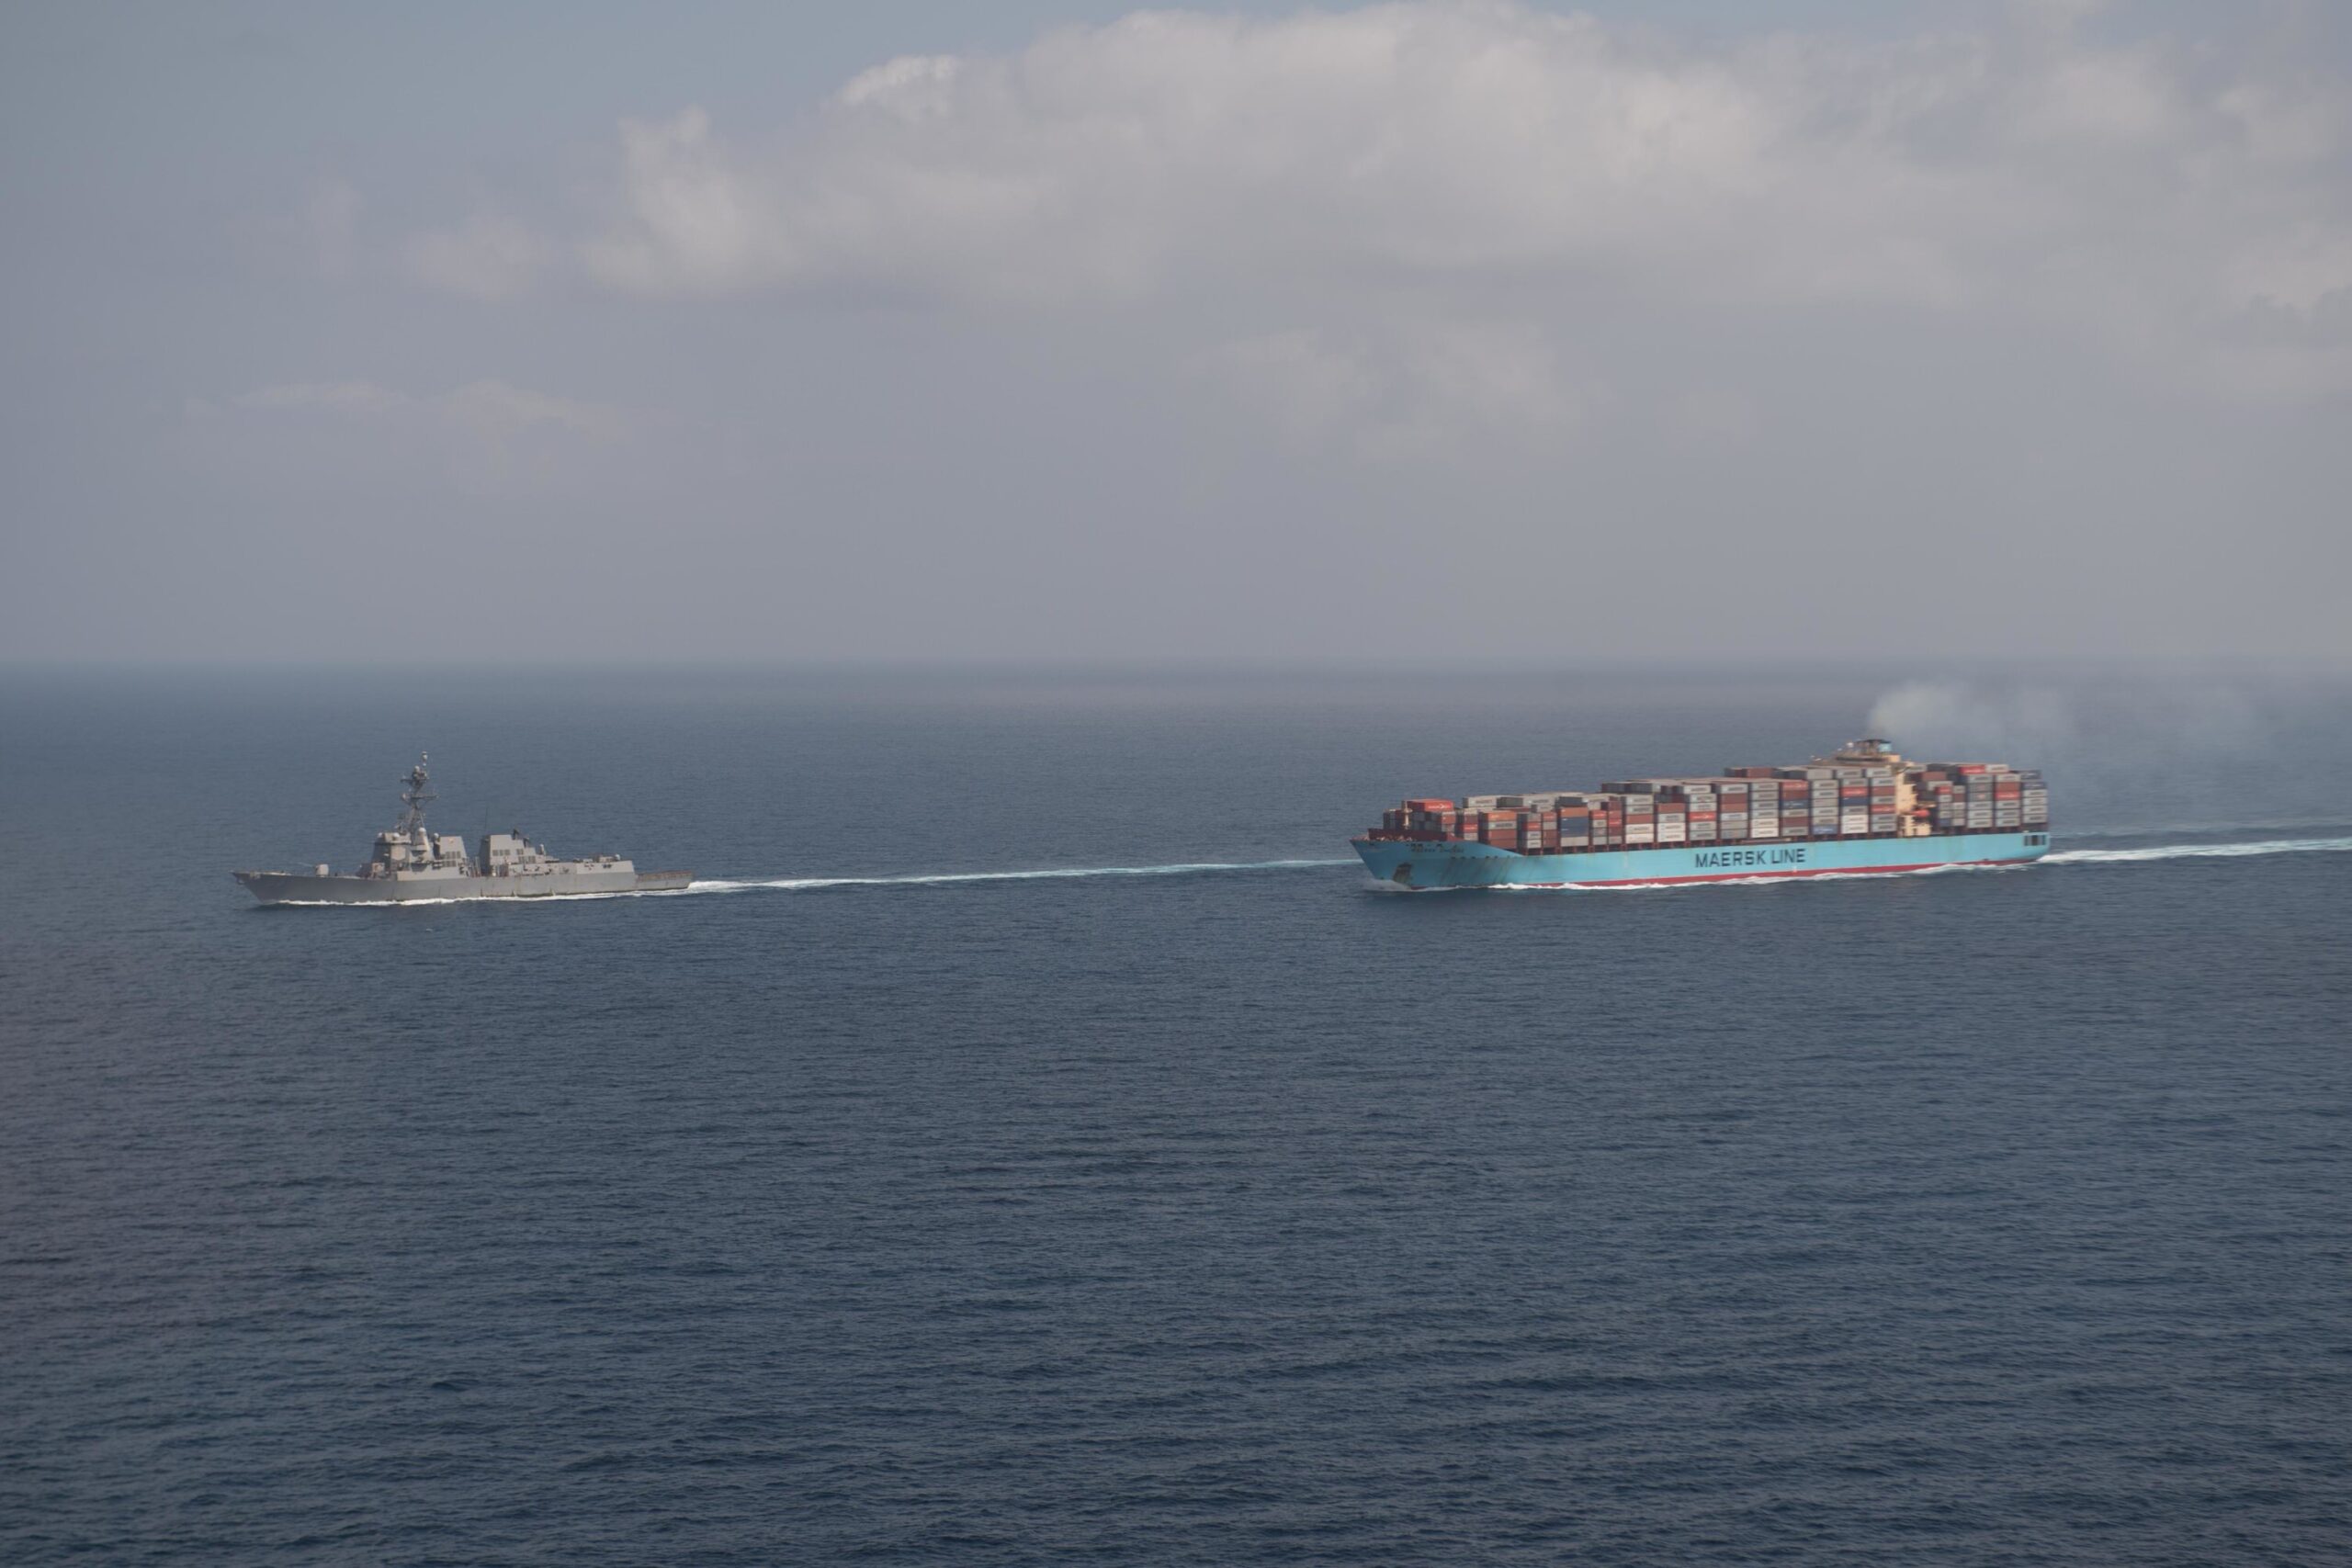 Maersk Containership in a naval convoy exercise